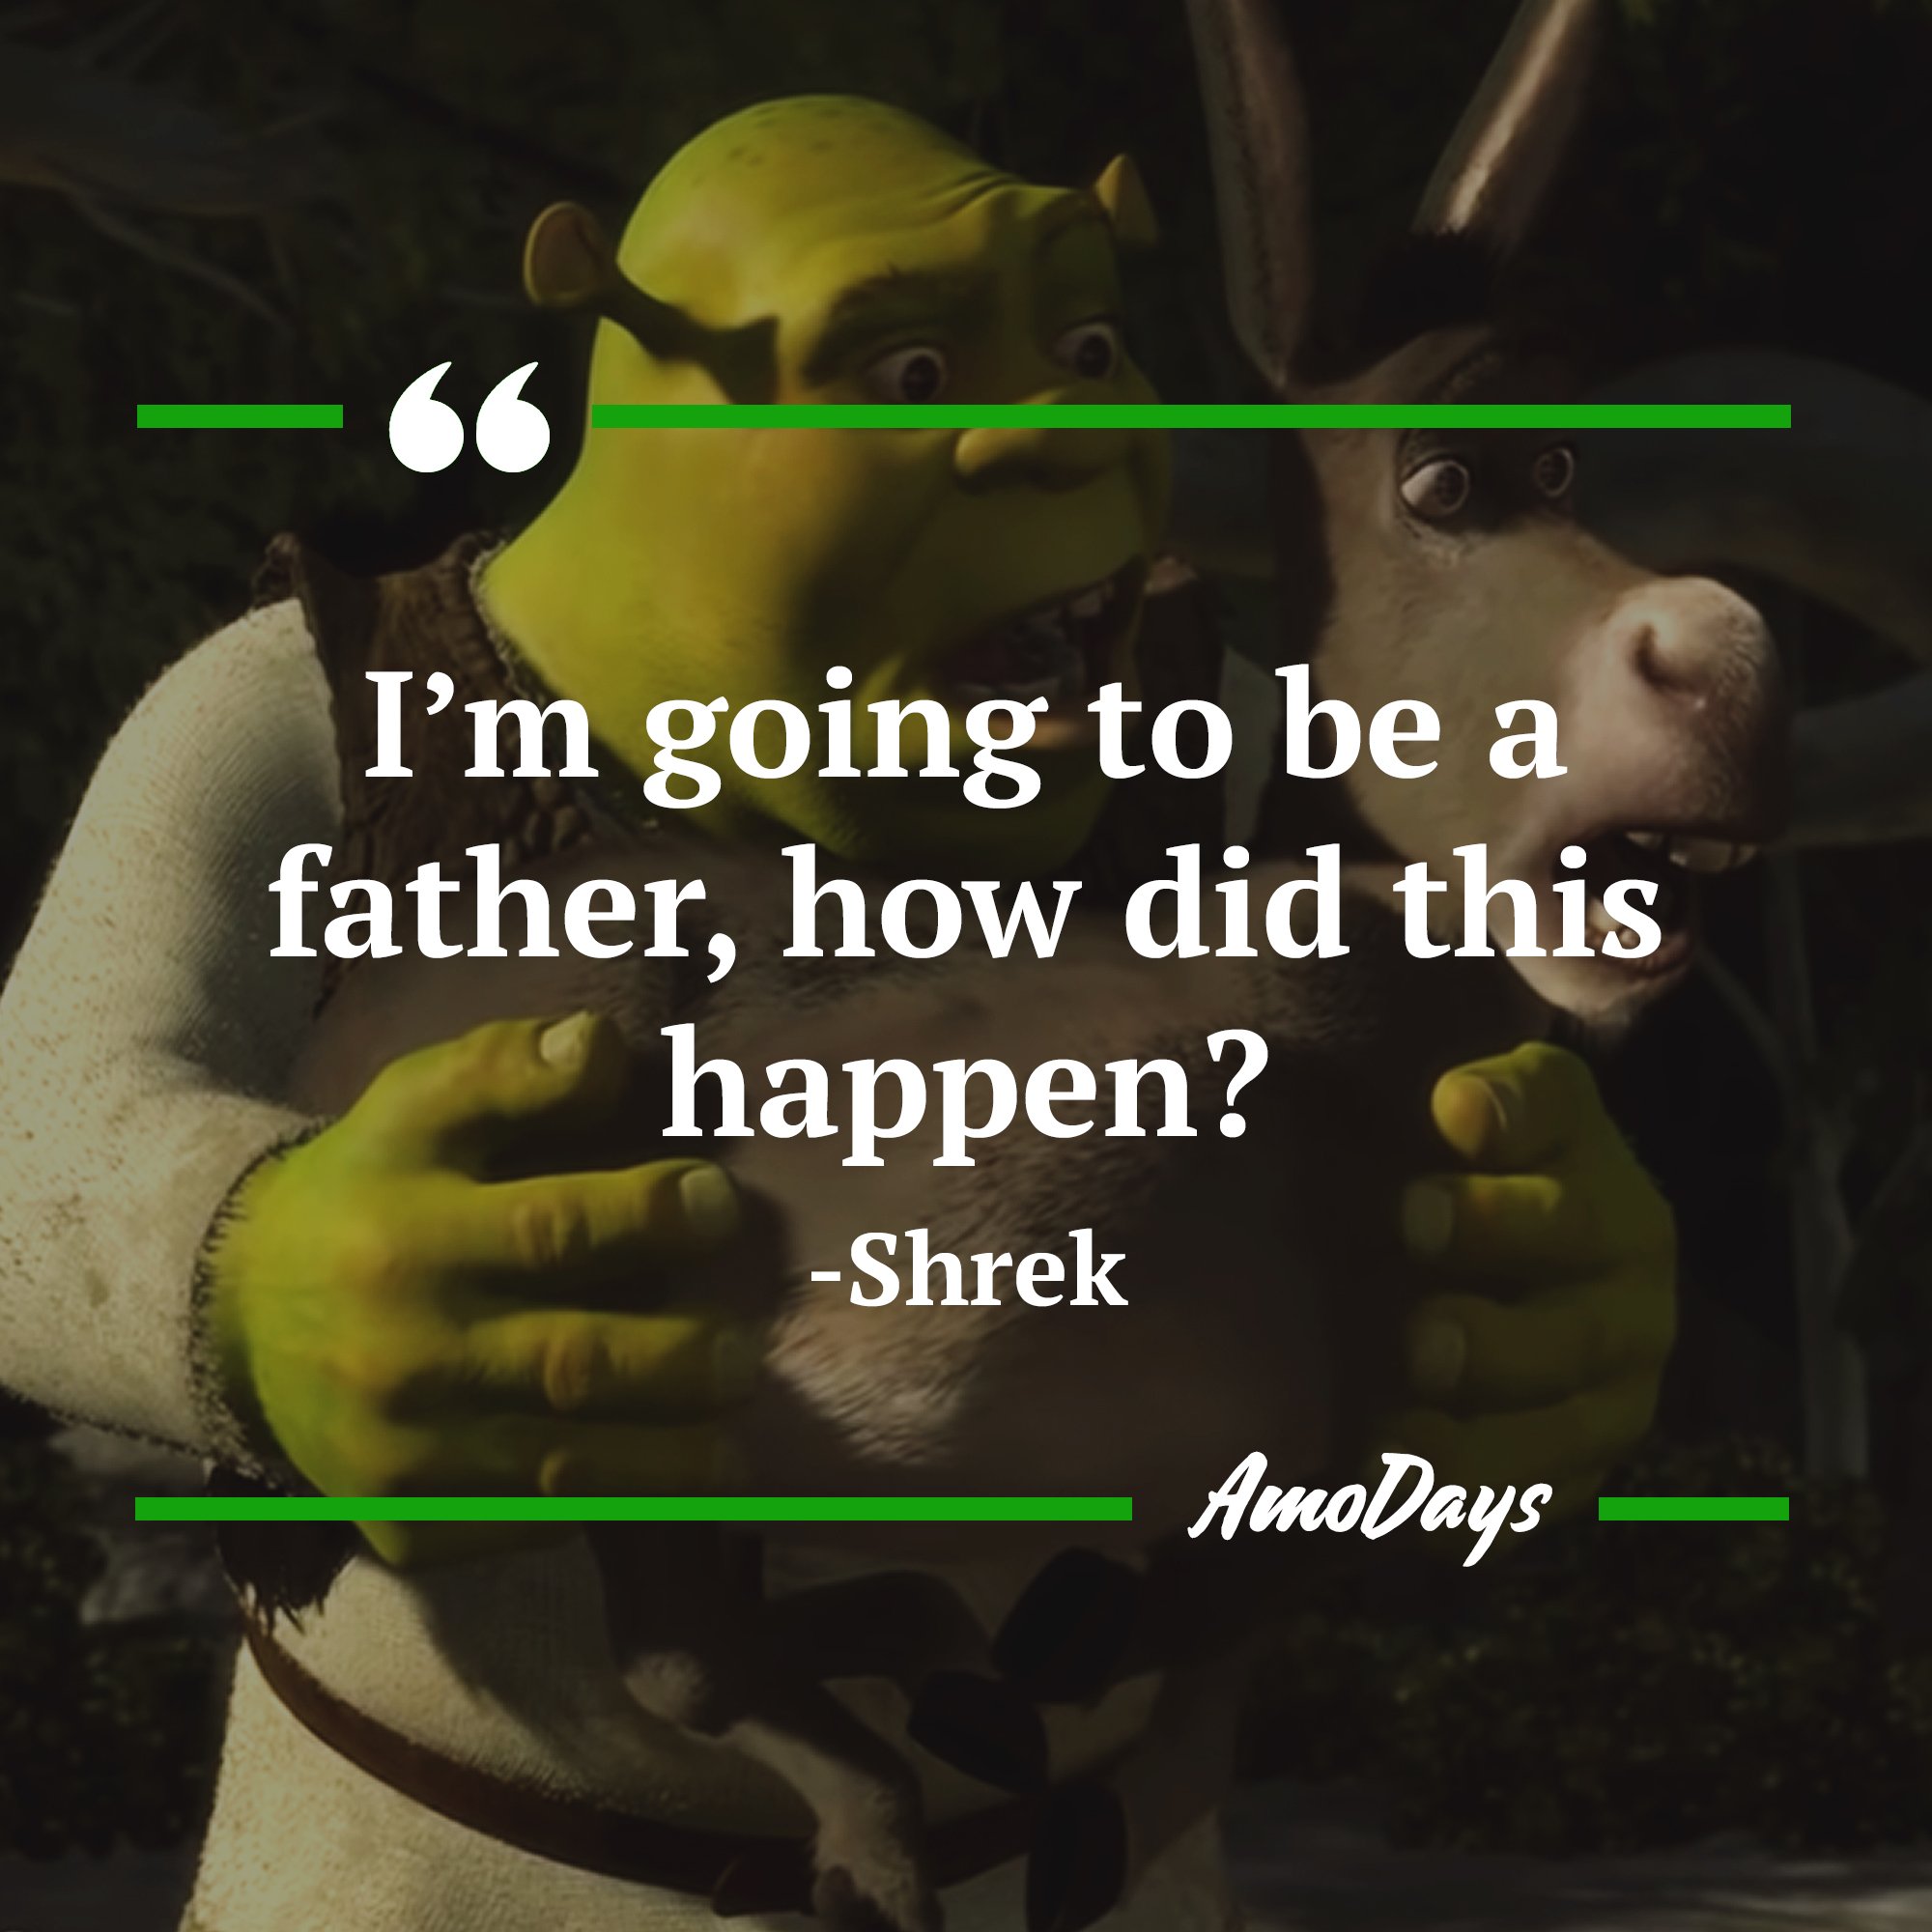 Shrek's quote: “I’m going to be a father, how did this happen?” | Image: AmoDays